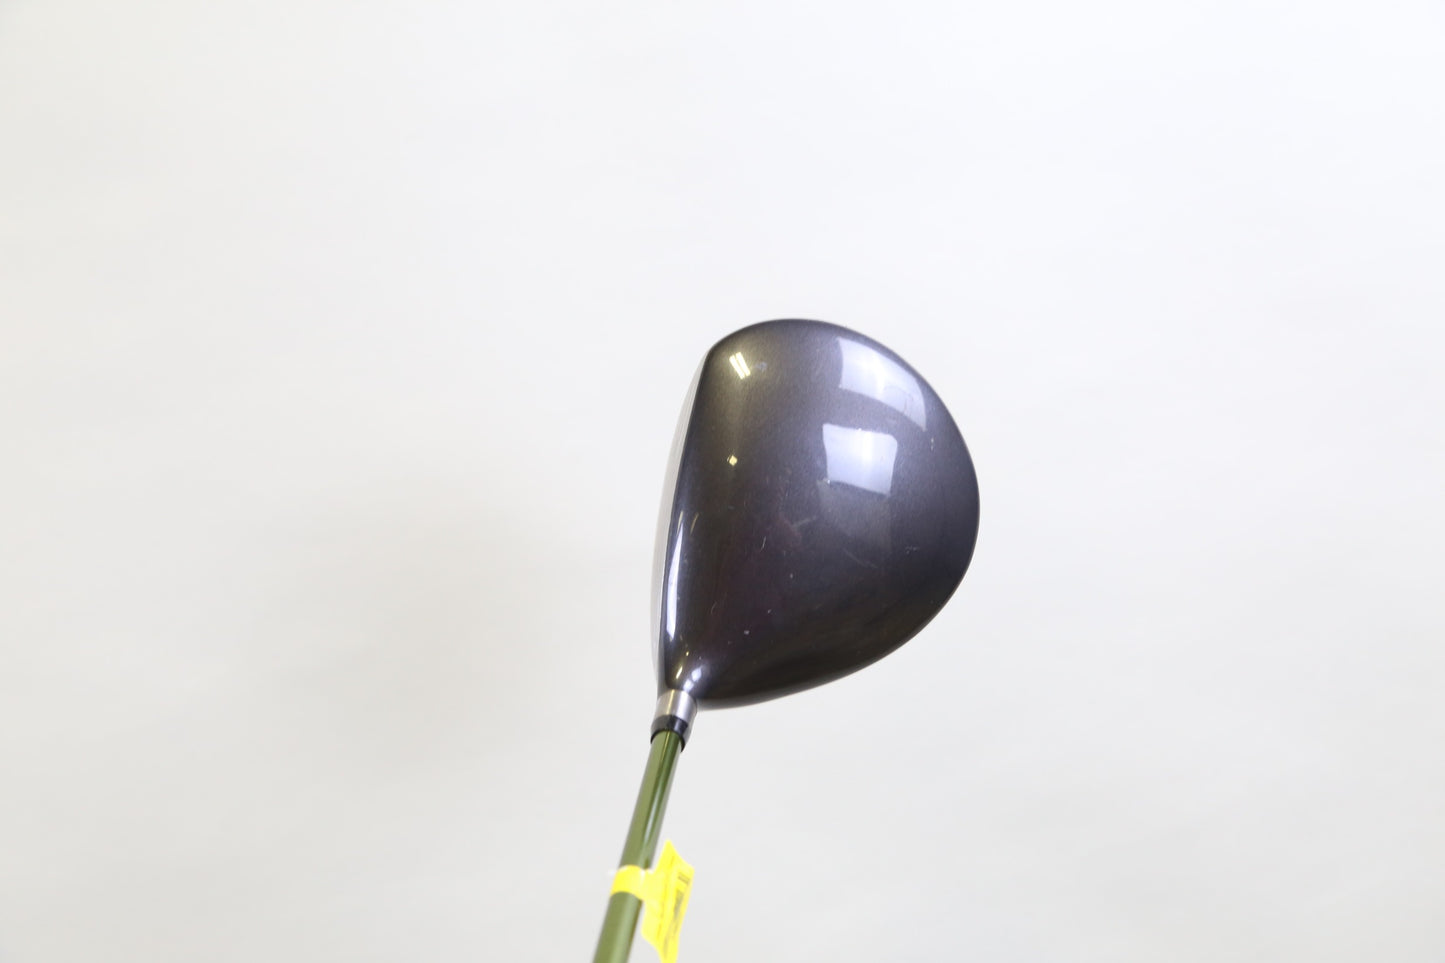 Used Cleveland Launcher 460 Driver - Right-Handed - 9.5 Degrees - Stiff Flex